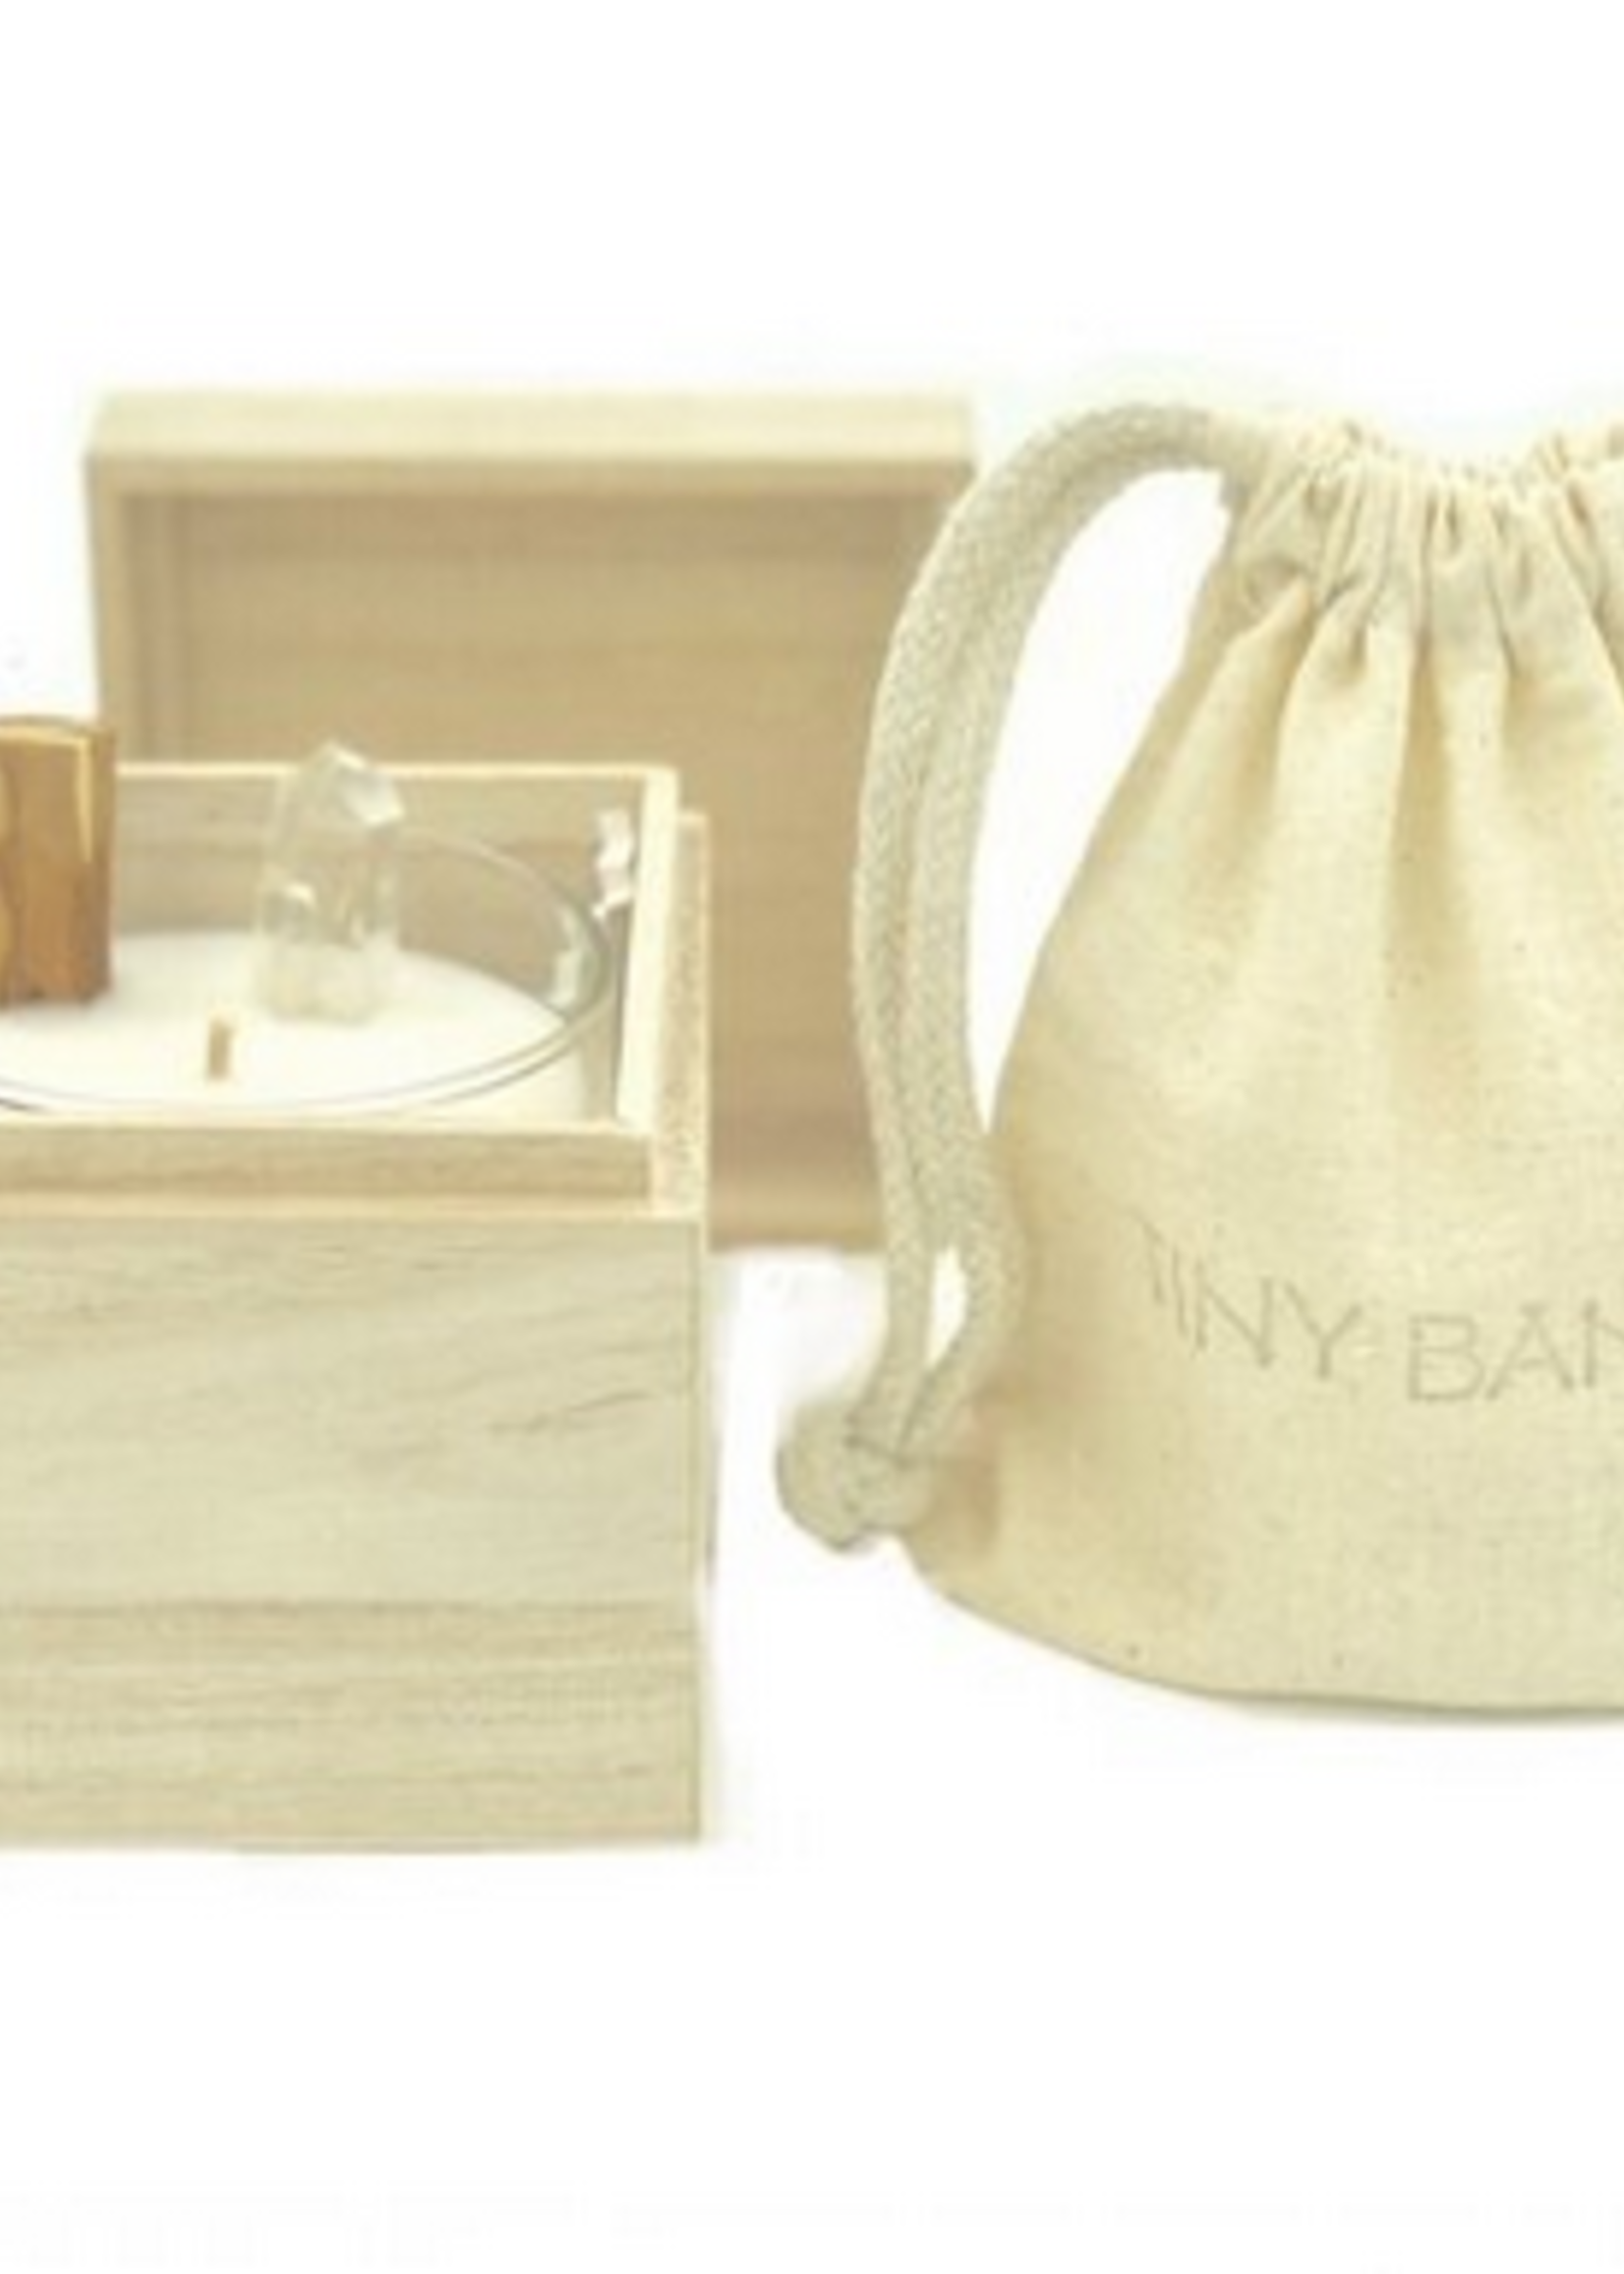 TINY BANDIT CRYSTAL CANDLE 3.5OZ IN WOOD BOX